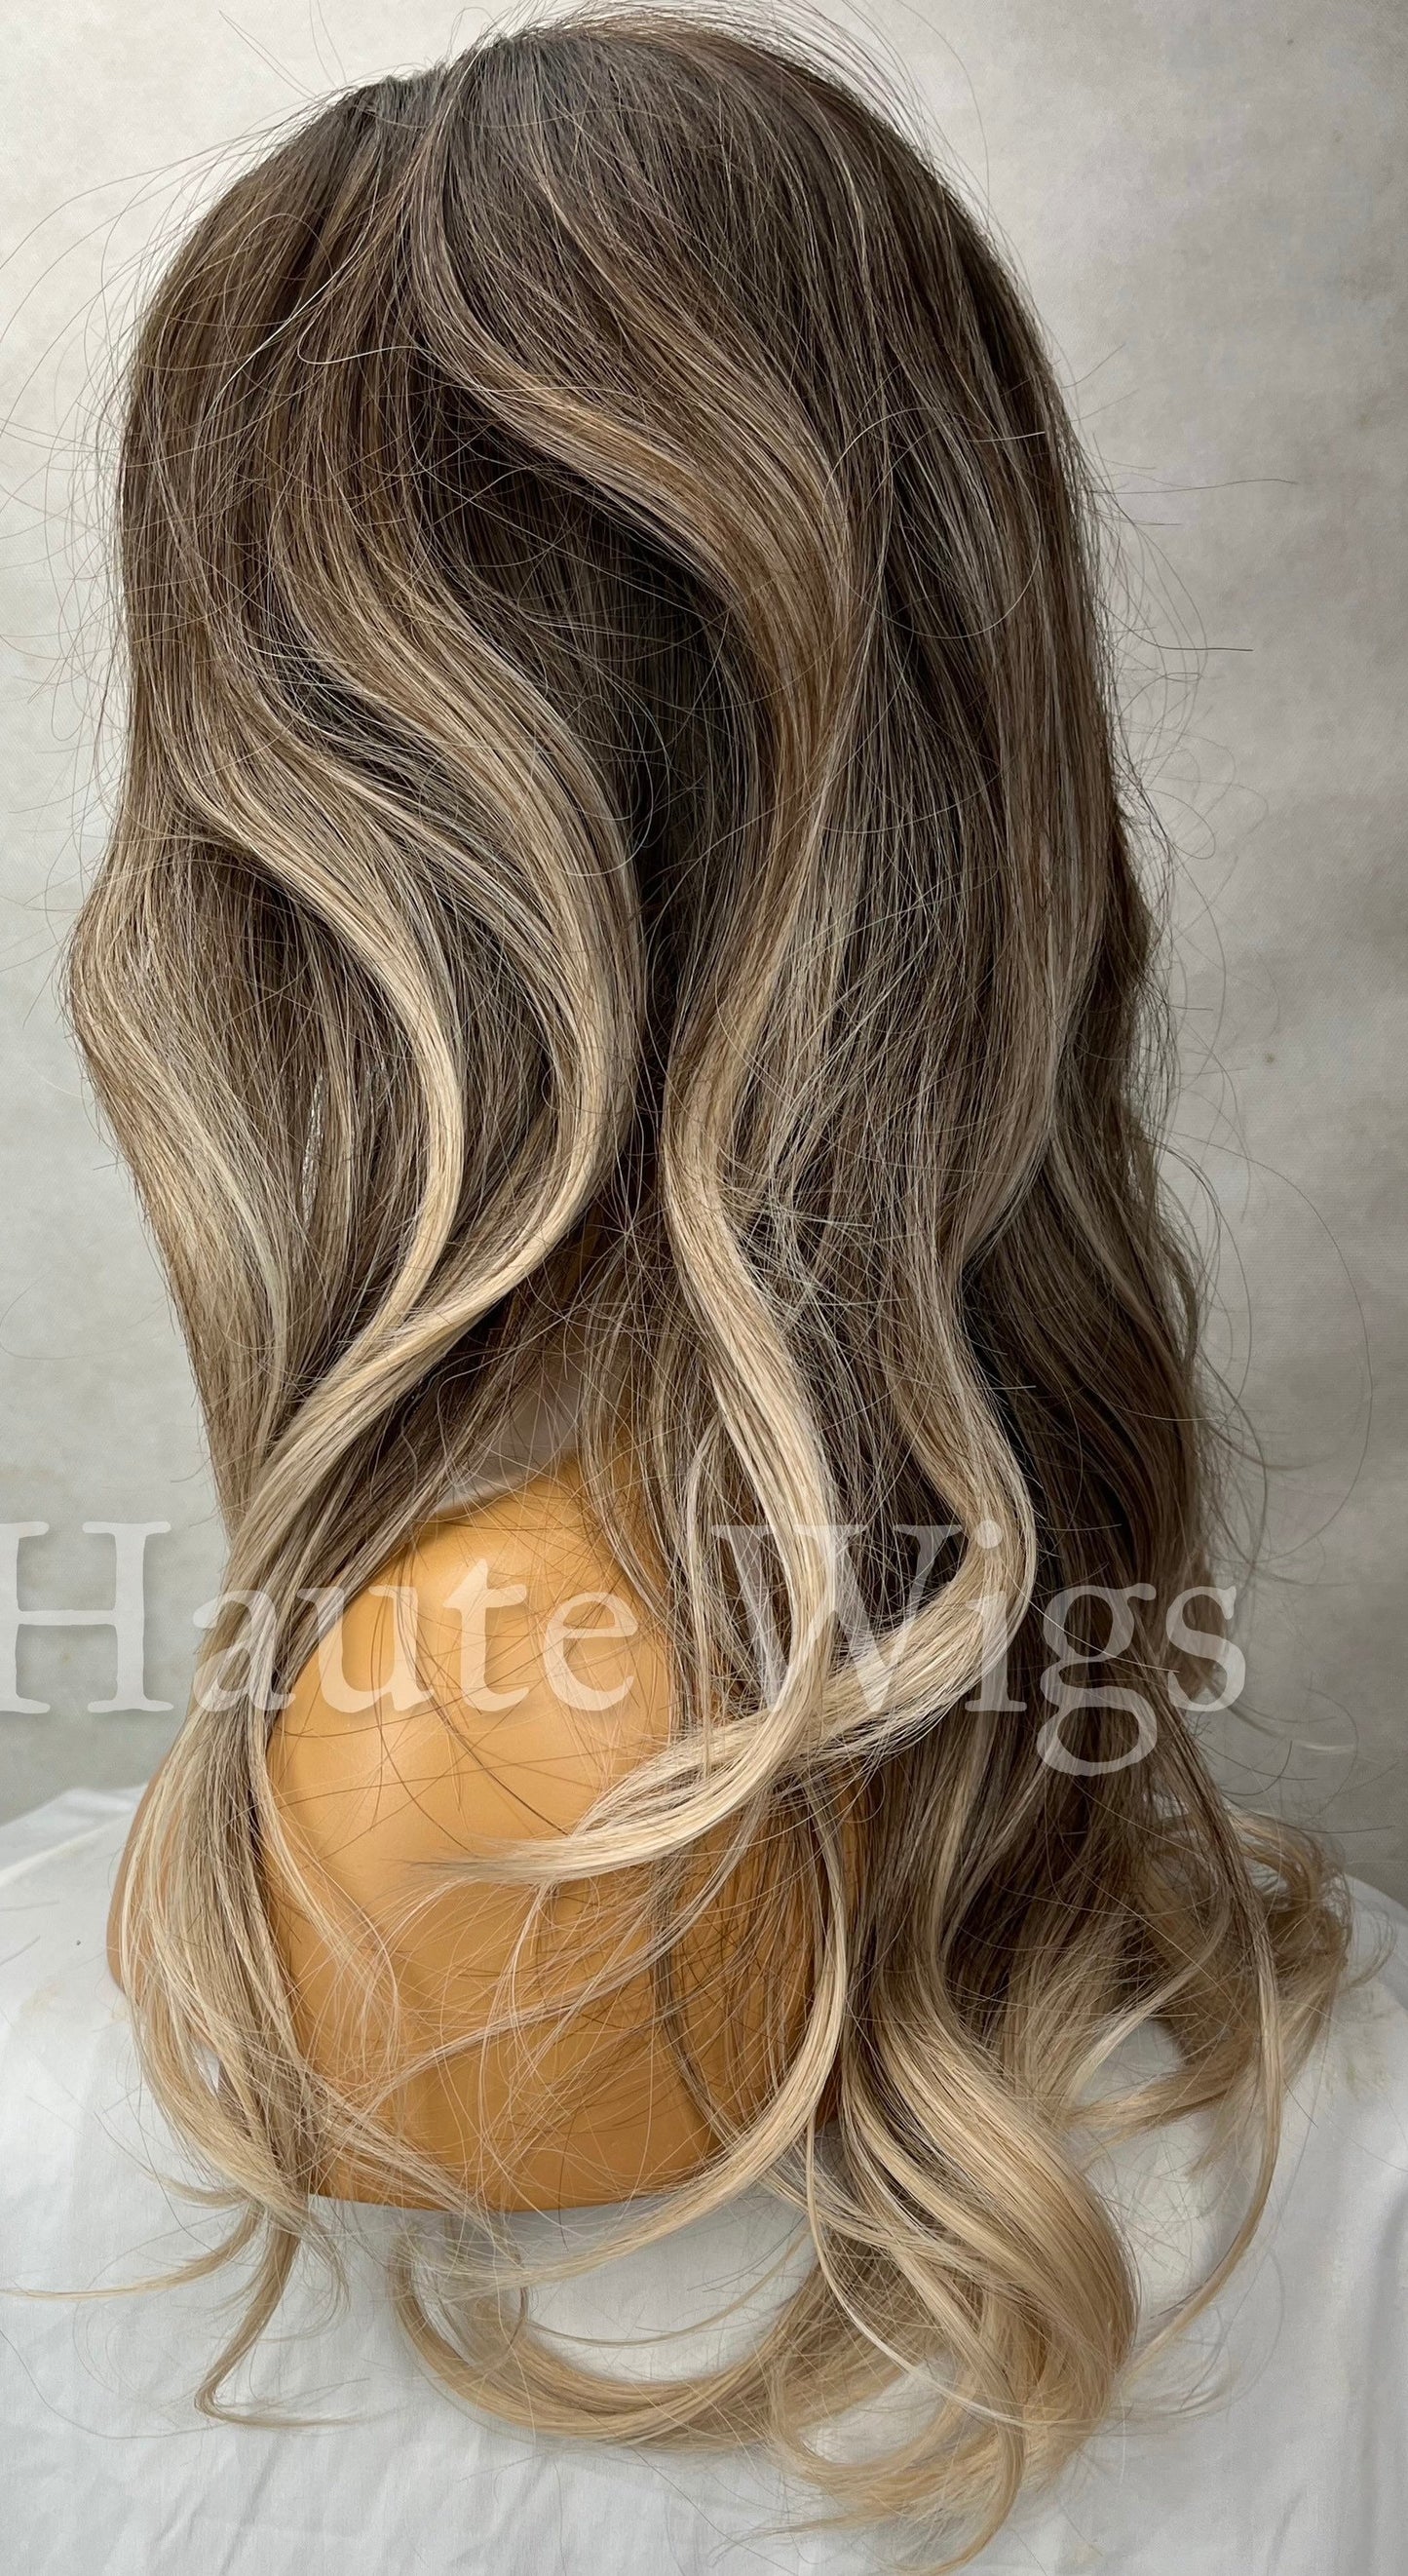 Sacramento - Wavy 22 Inch Ash Blonde Cool Toned Dirty Ombre Brown Wig With Fringe Bangs Center Parting Curly Hair Wigs Gift